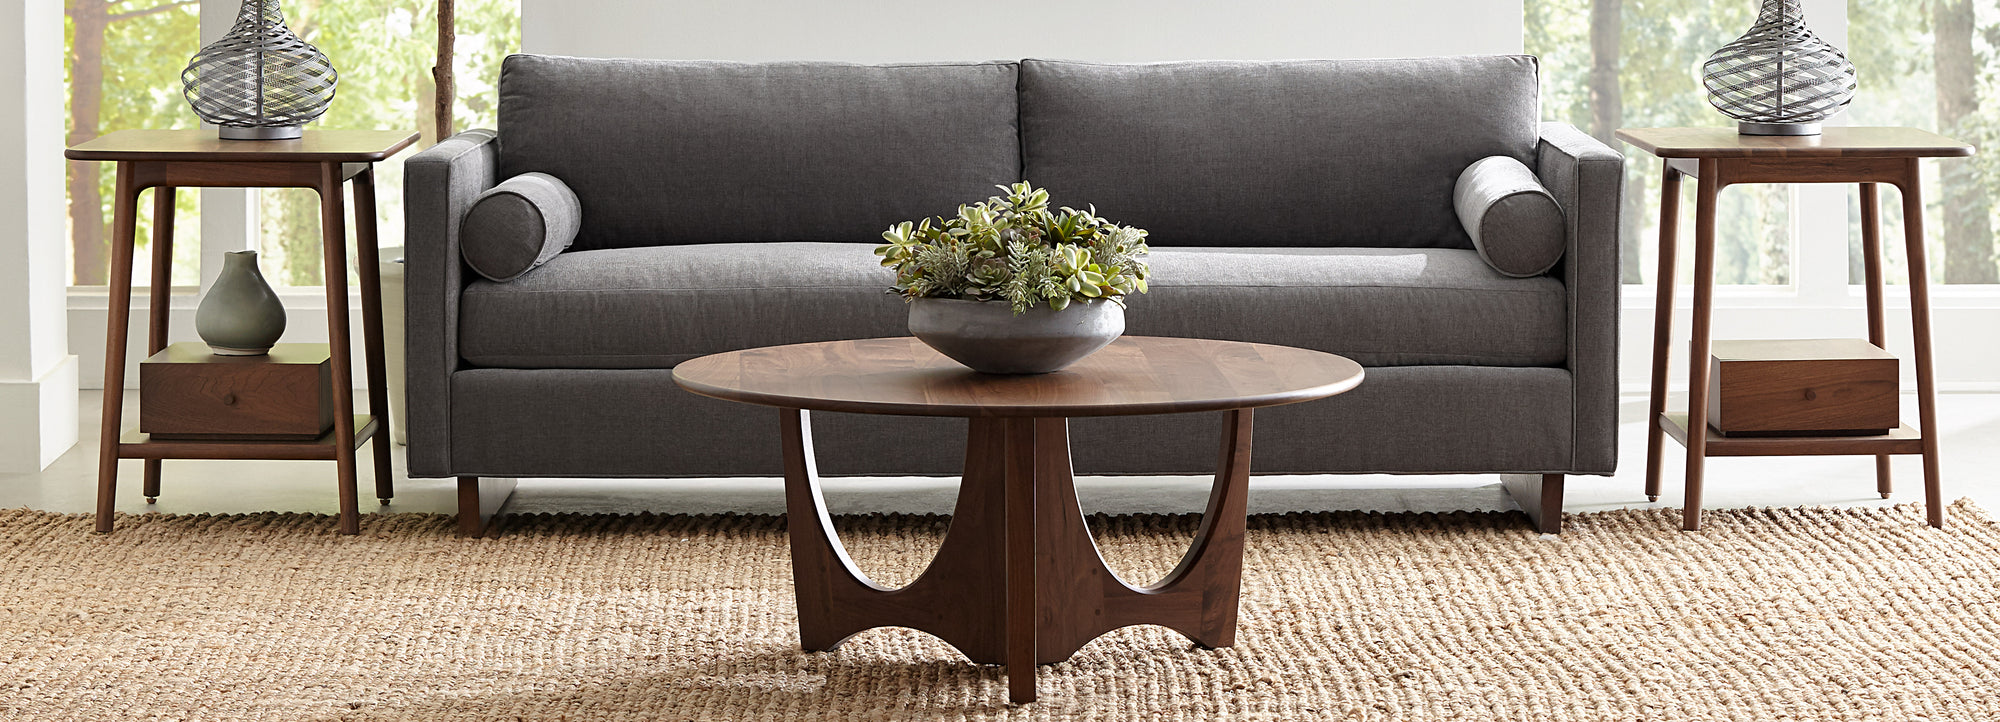 Stickley Walnut Grove collection end tables and coffee table beside gray sofa